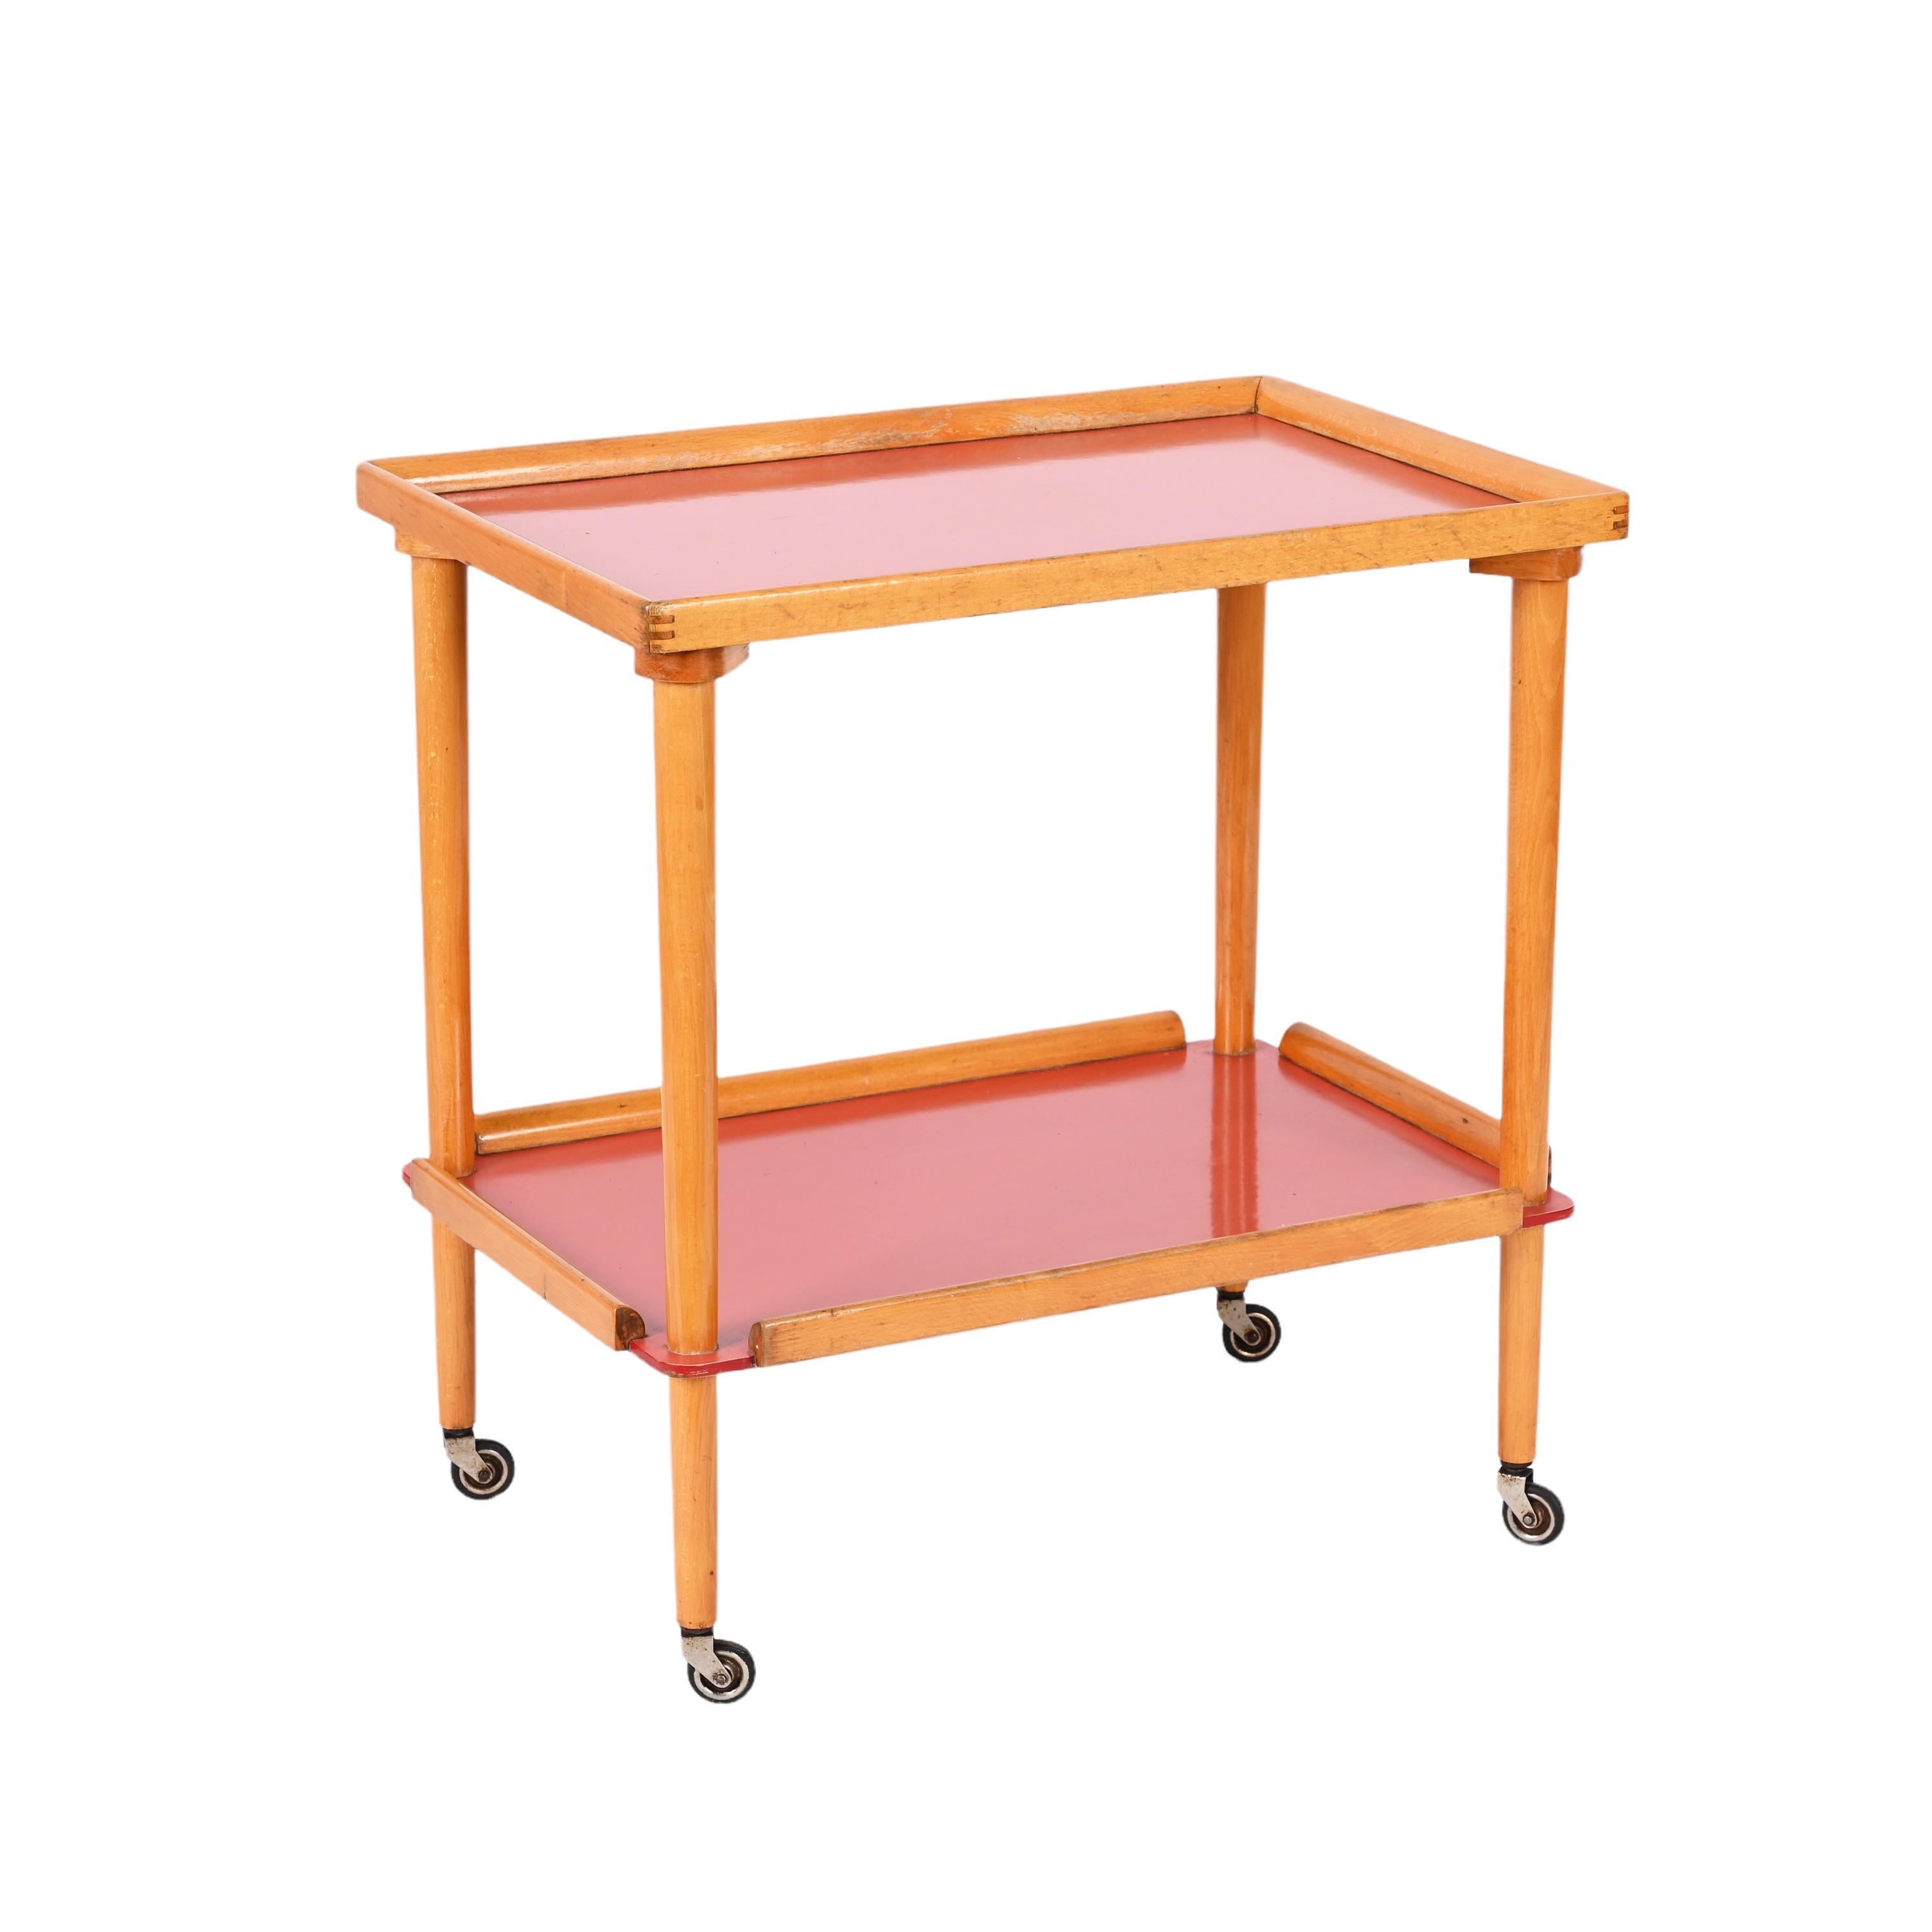 Fantastic midcentury serving trolley in beech wood with two formica red shelves. This unique piece was produced in Italy during the 1960s.

This is a wonderful item in fantastic vintage condition, very rare due to the two formica red shelves and